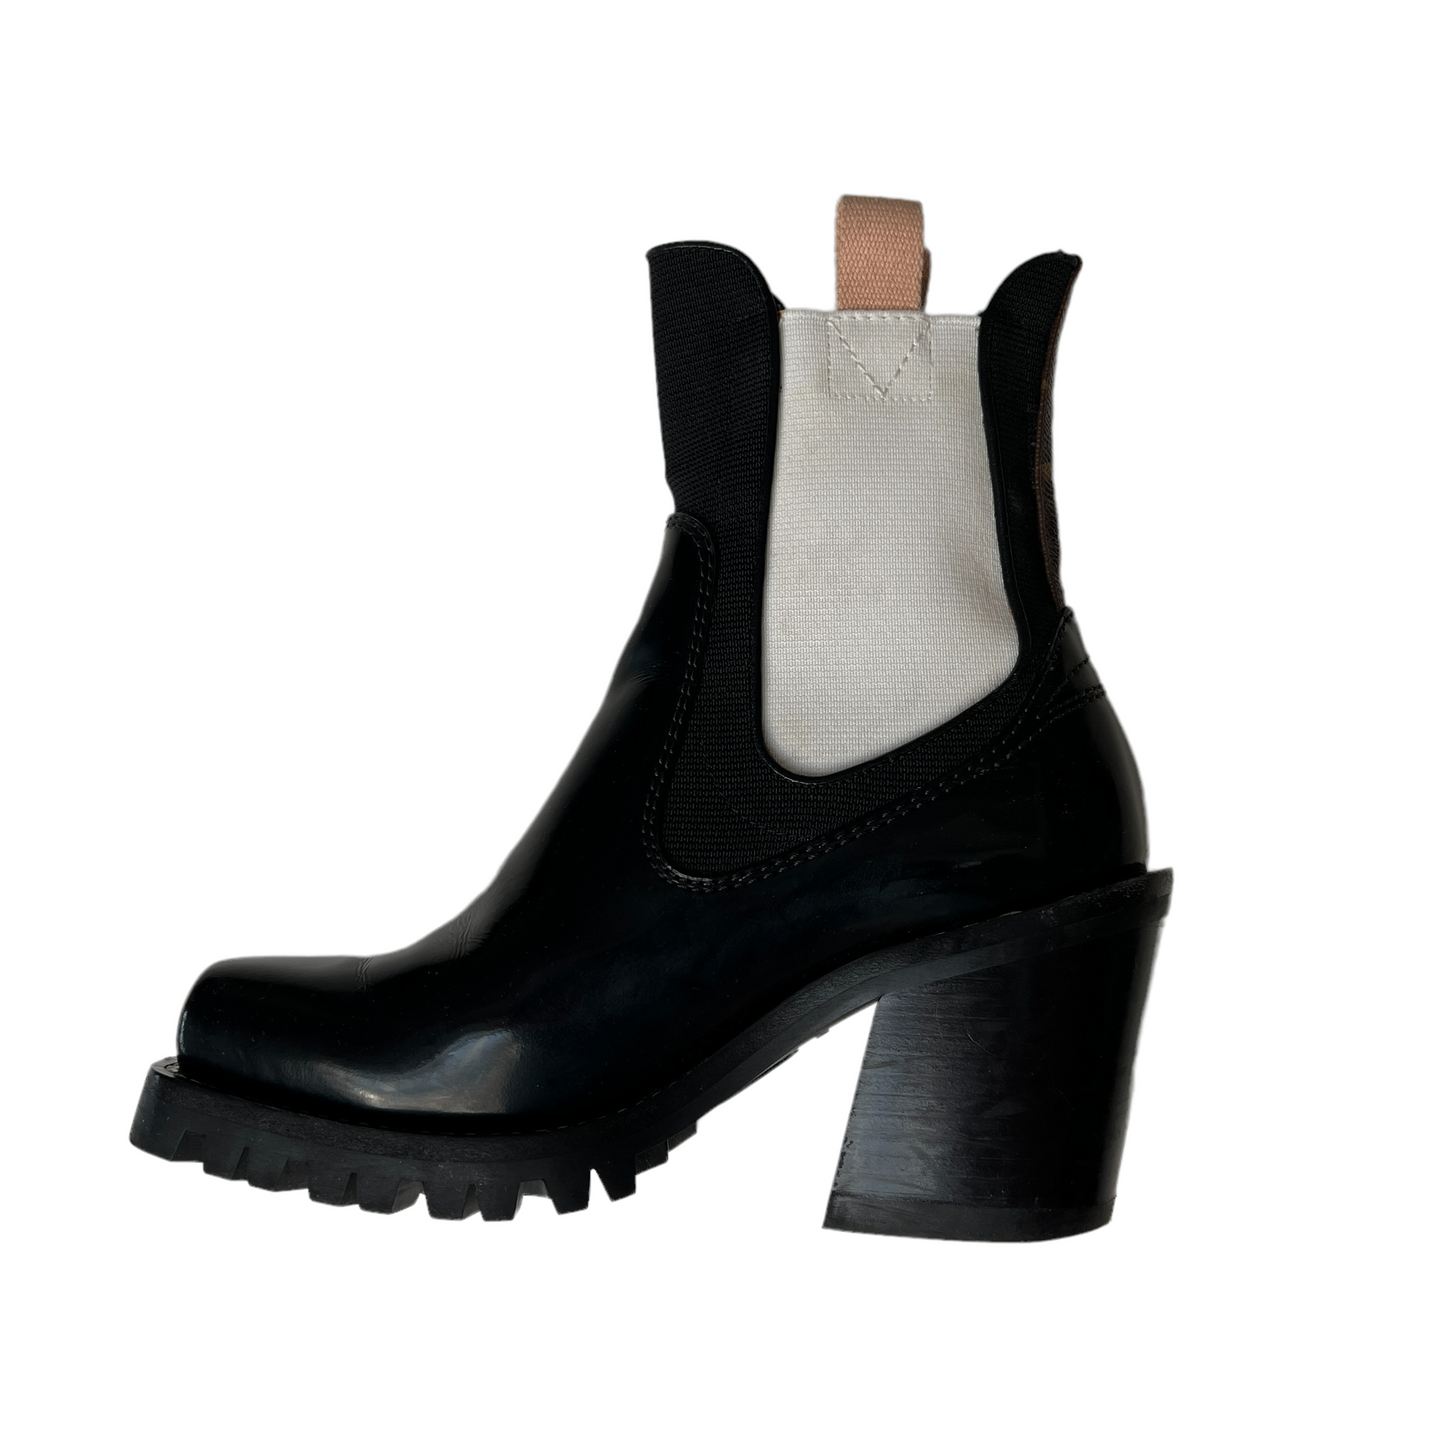 Chelsea Boots - 6.5